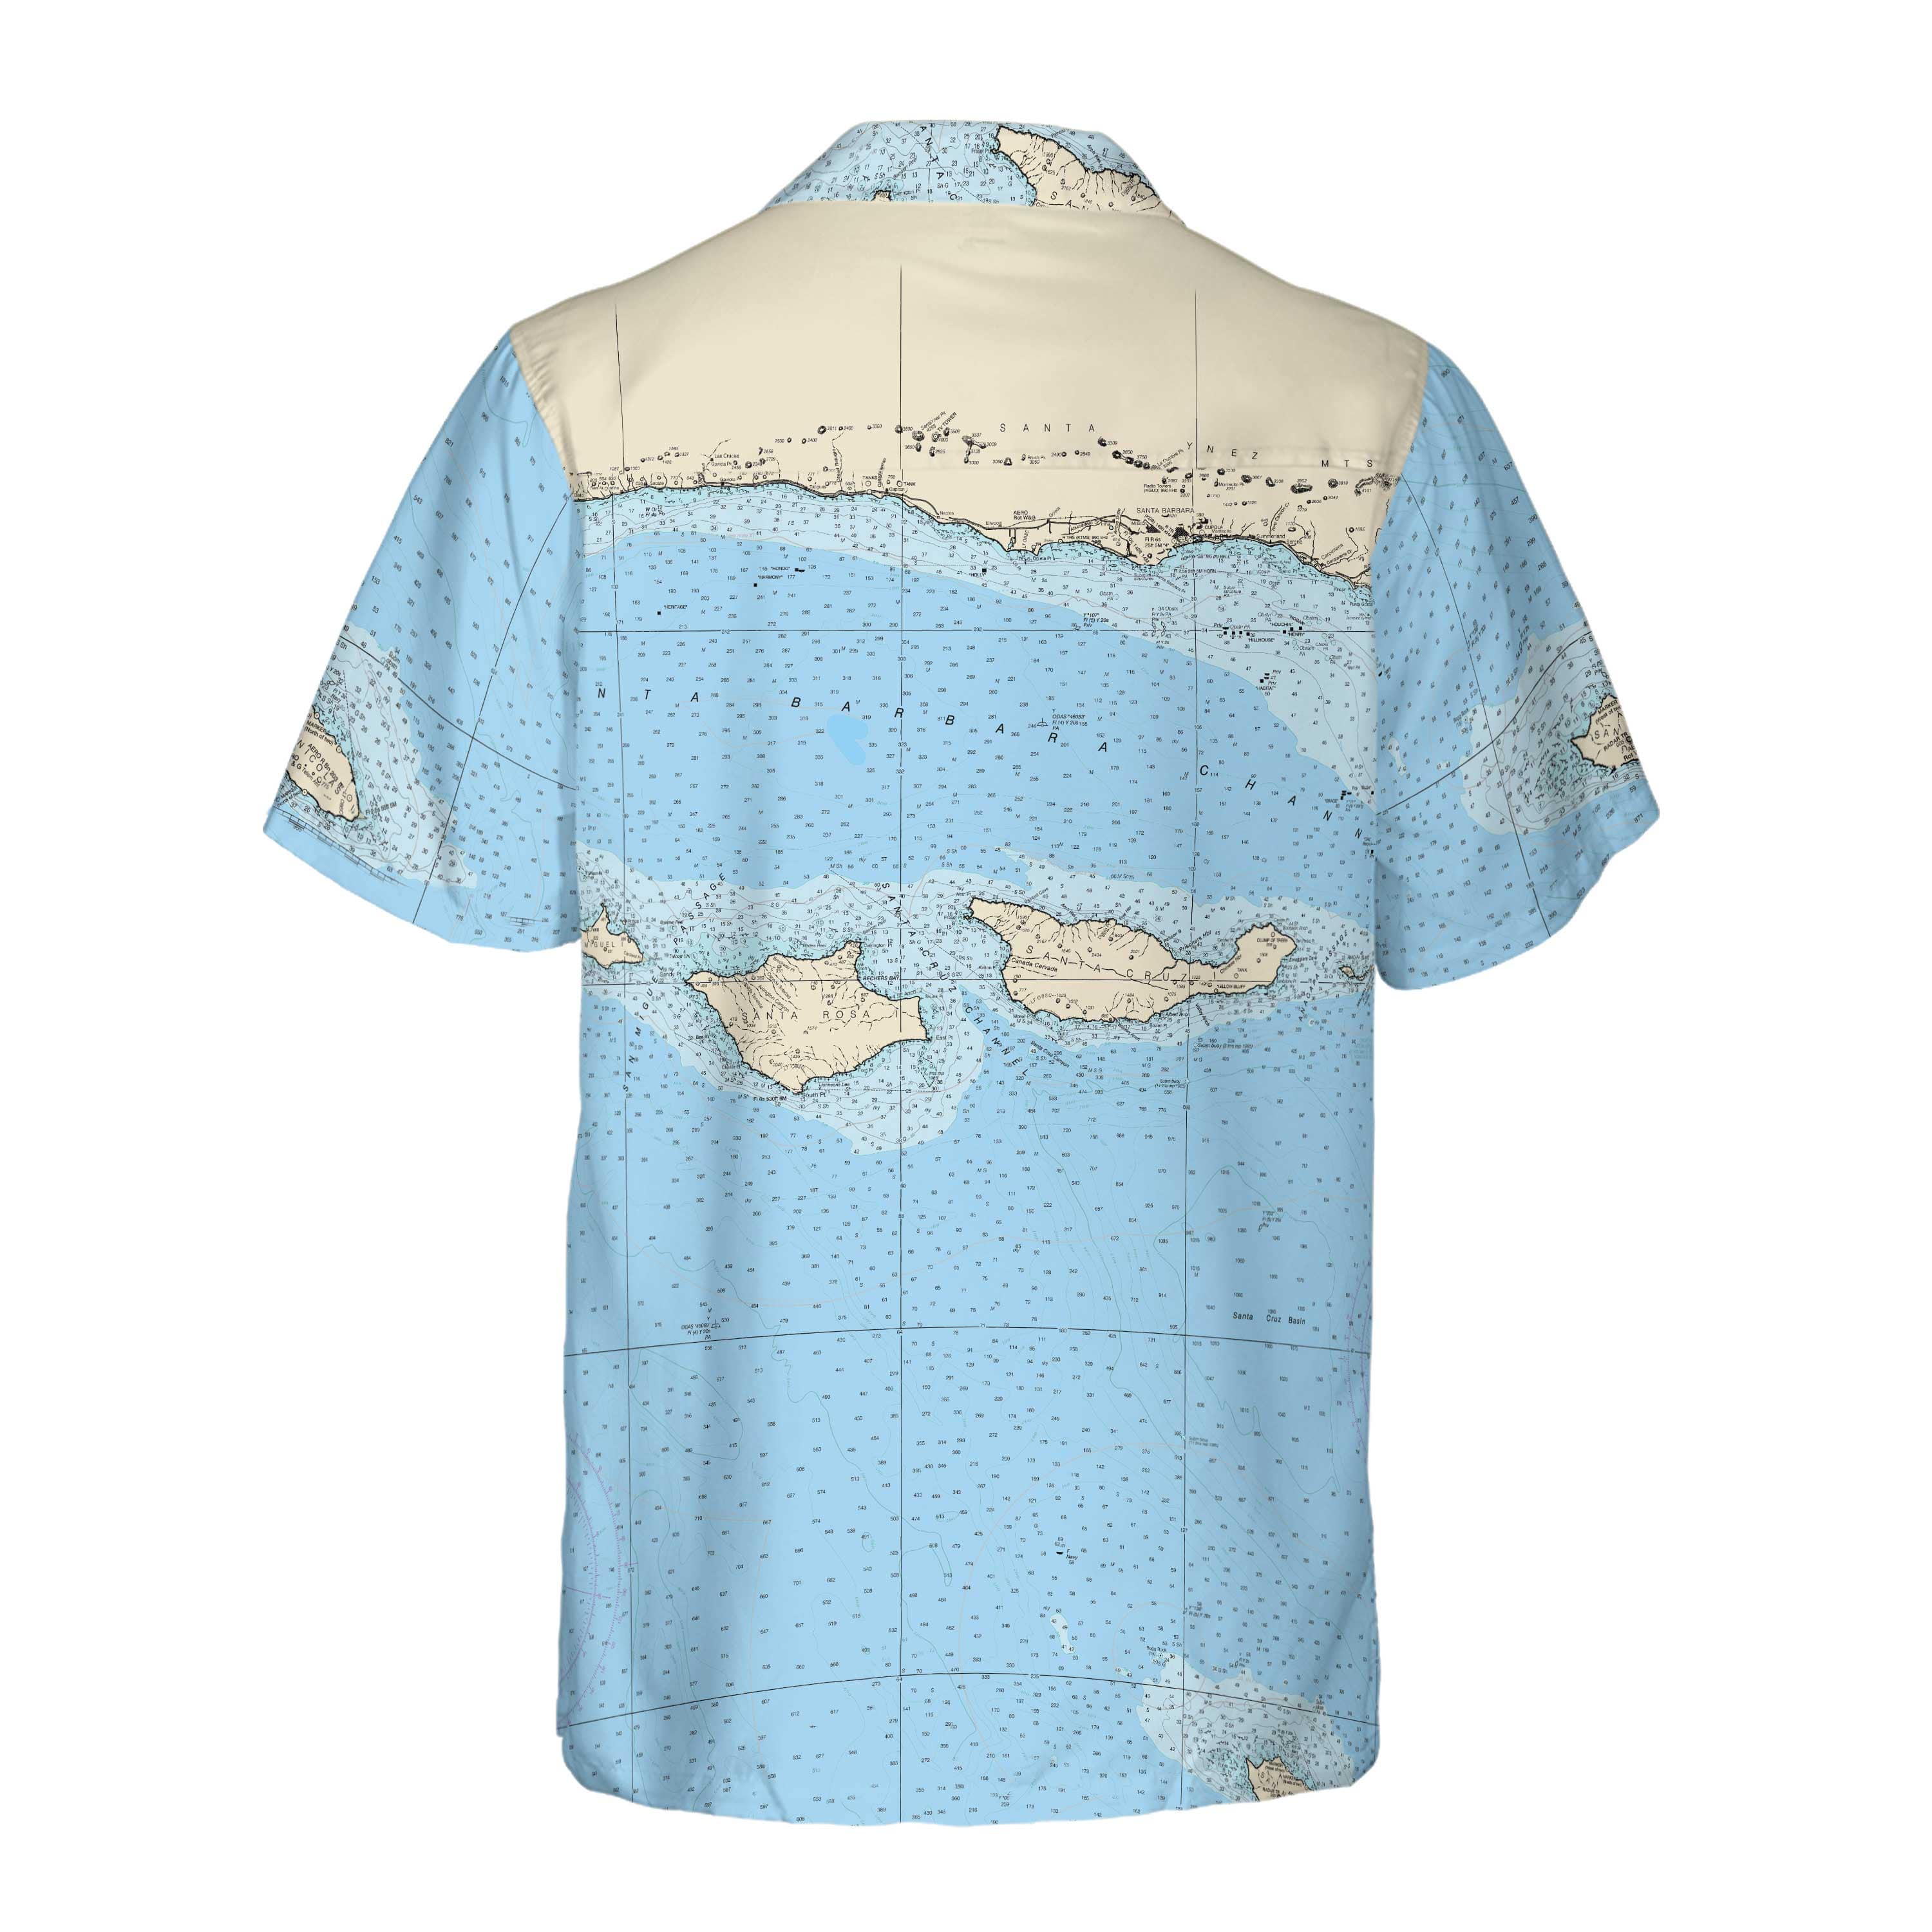 The Channel Islands Blue Coconut Button Camp Shirt